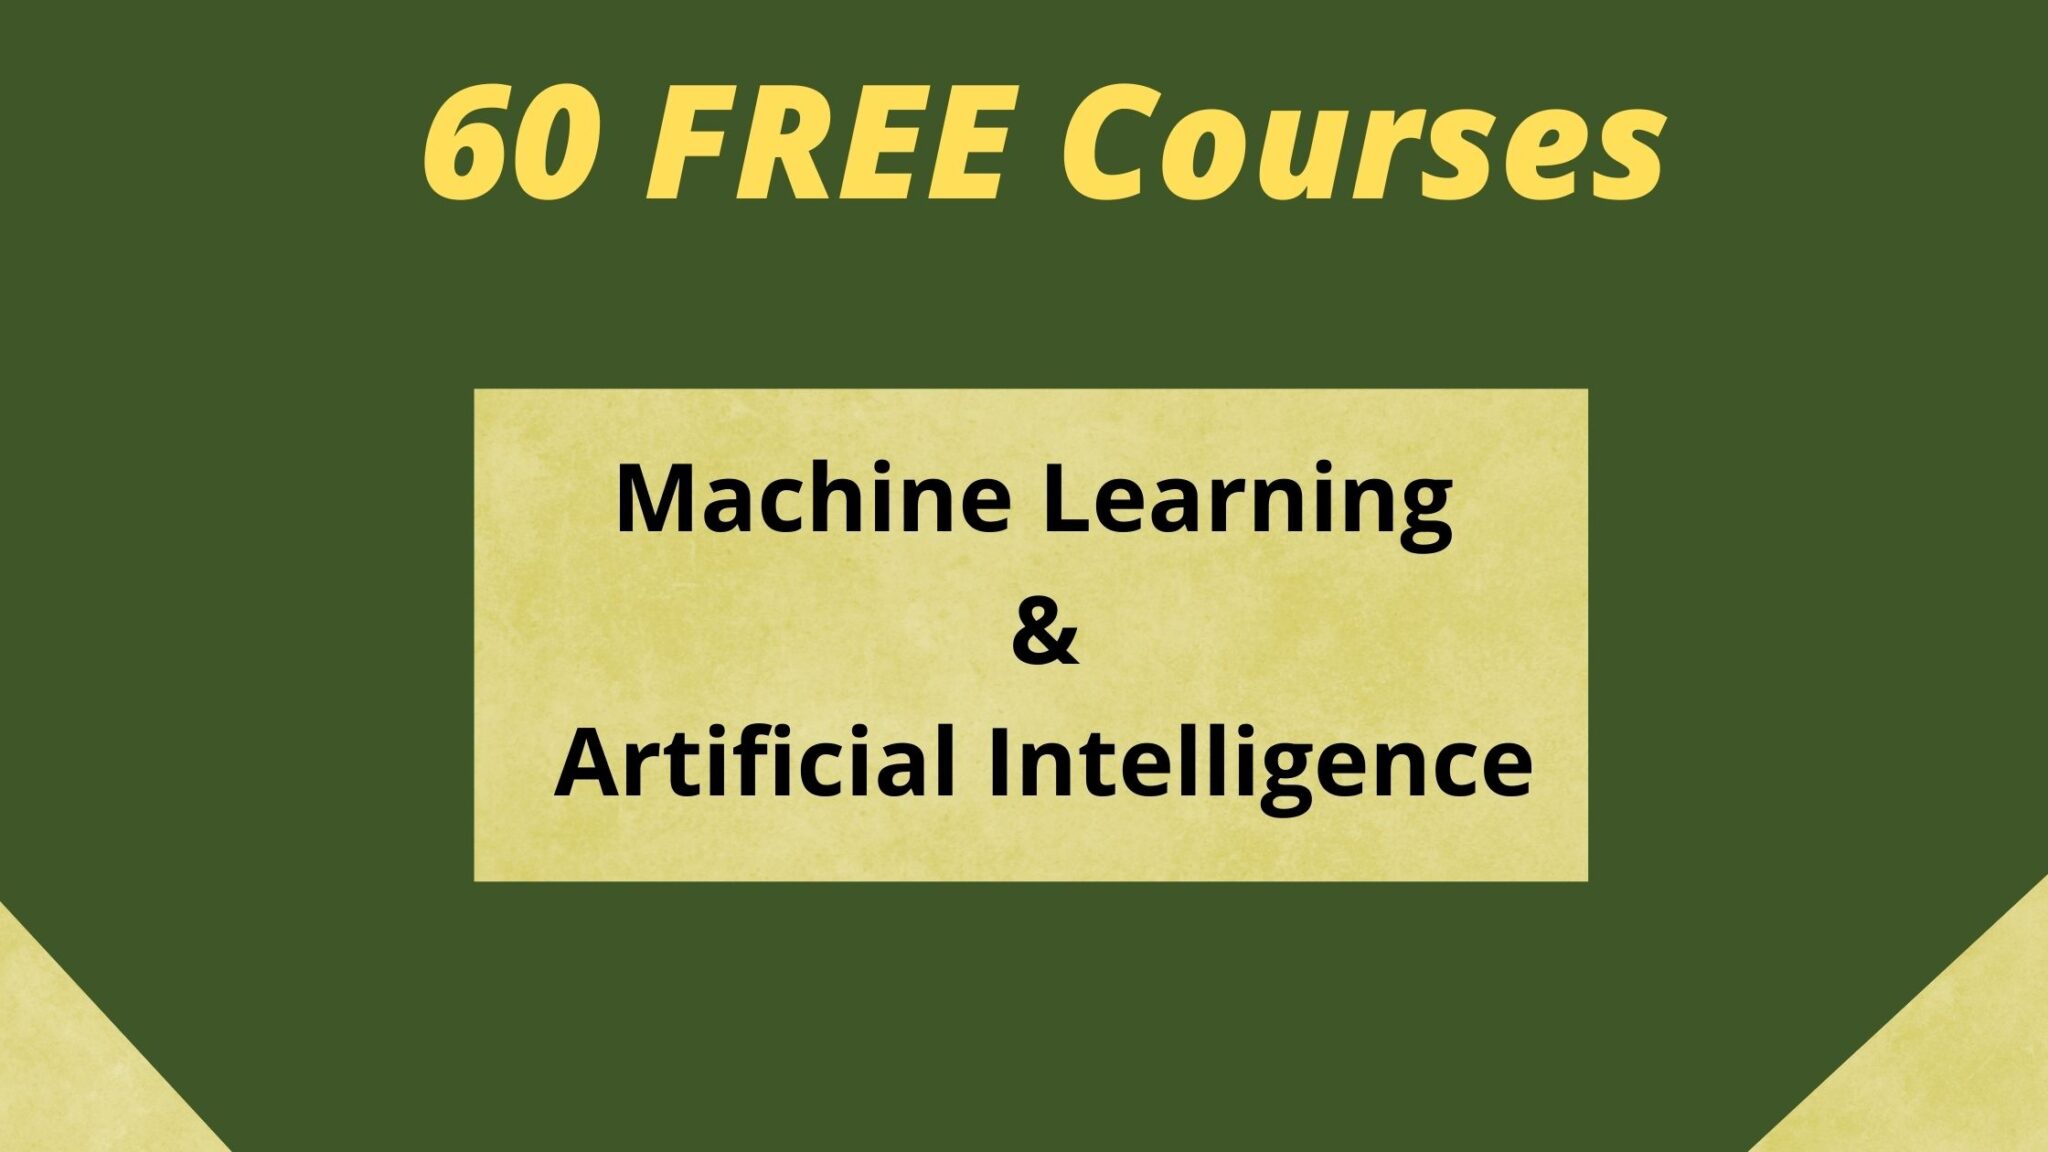 60-best-free-online-courses-for-machine-learning-ai-in-2021-march